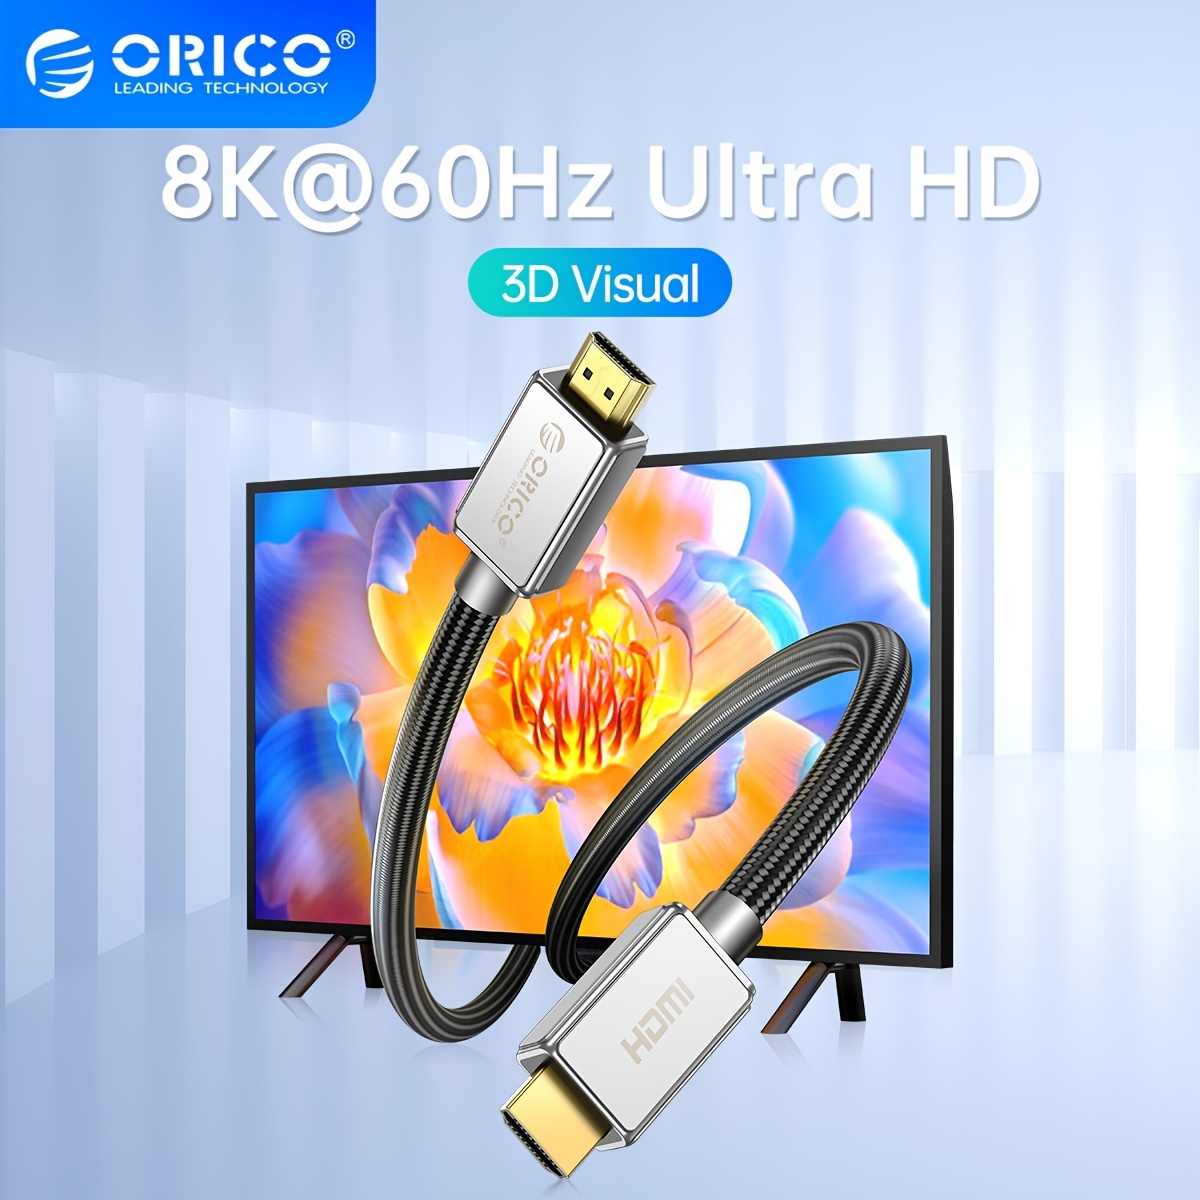 HDMI 2.1 Cable 8K 60Hz 4K 120Hz 48Gbps eARC HDR for Amplifier TV PS4 PS5  RTX3080